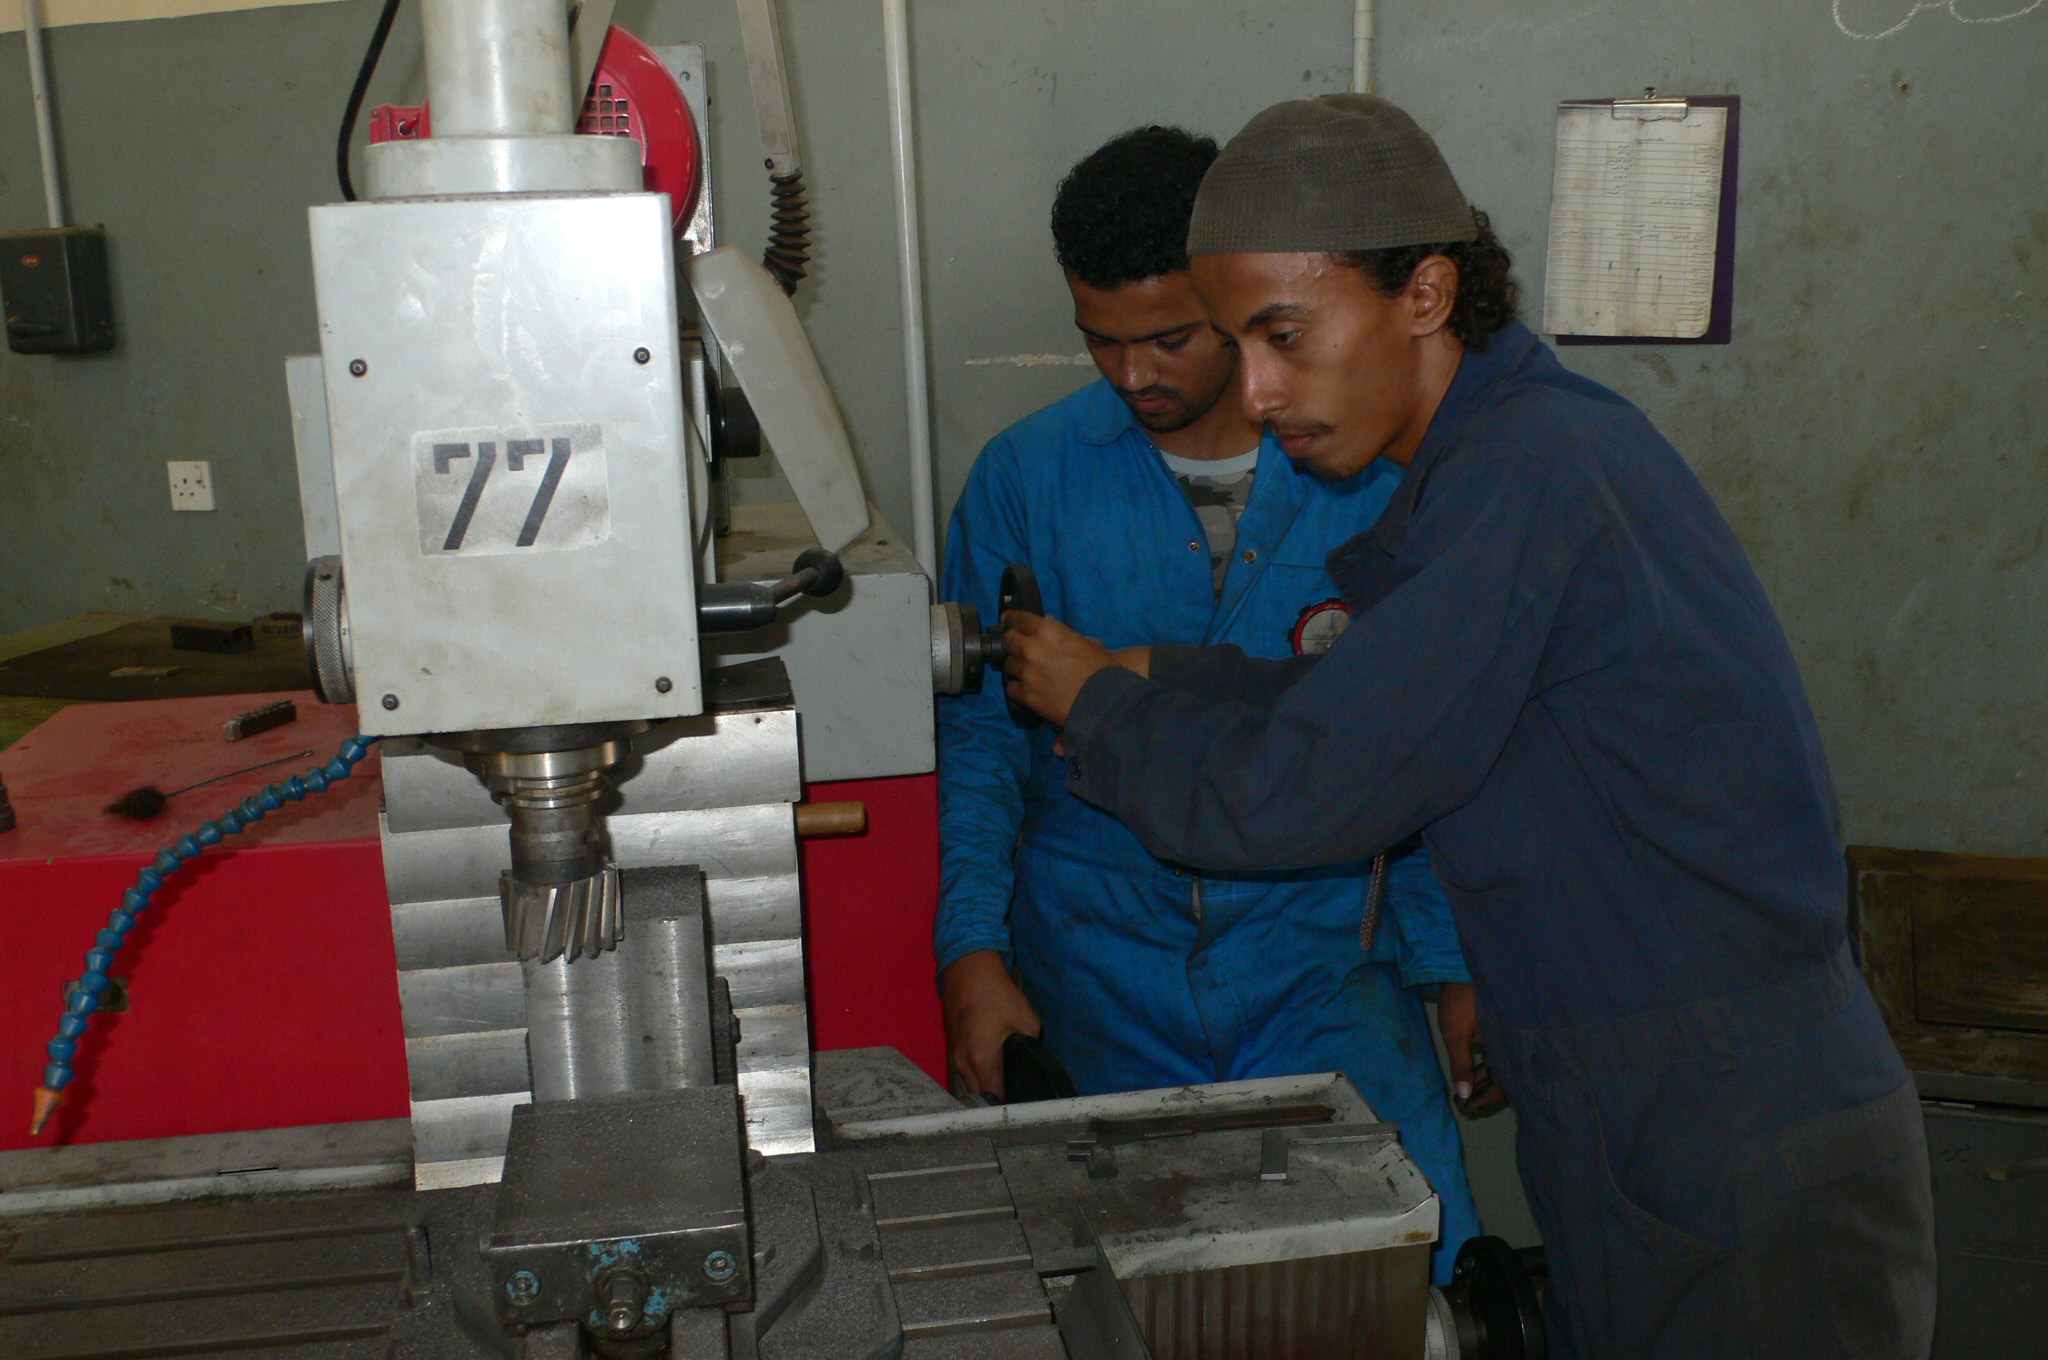 Technical and Vocational Education a Development and Future Portal